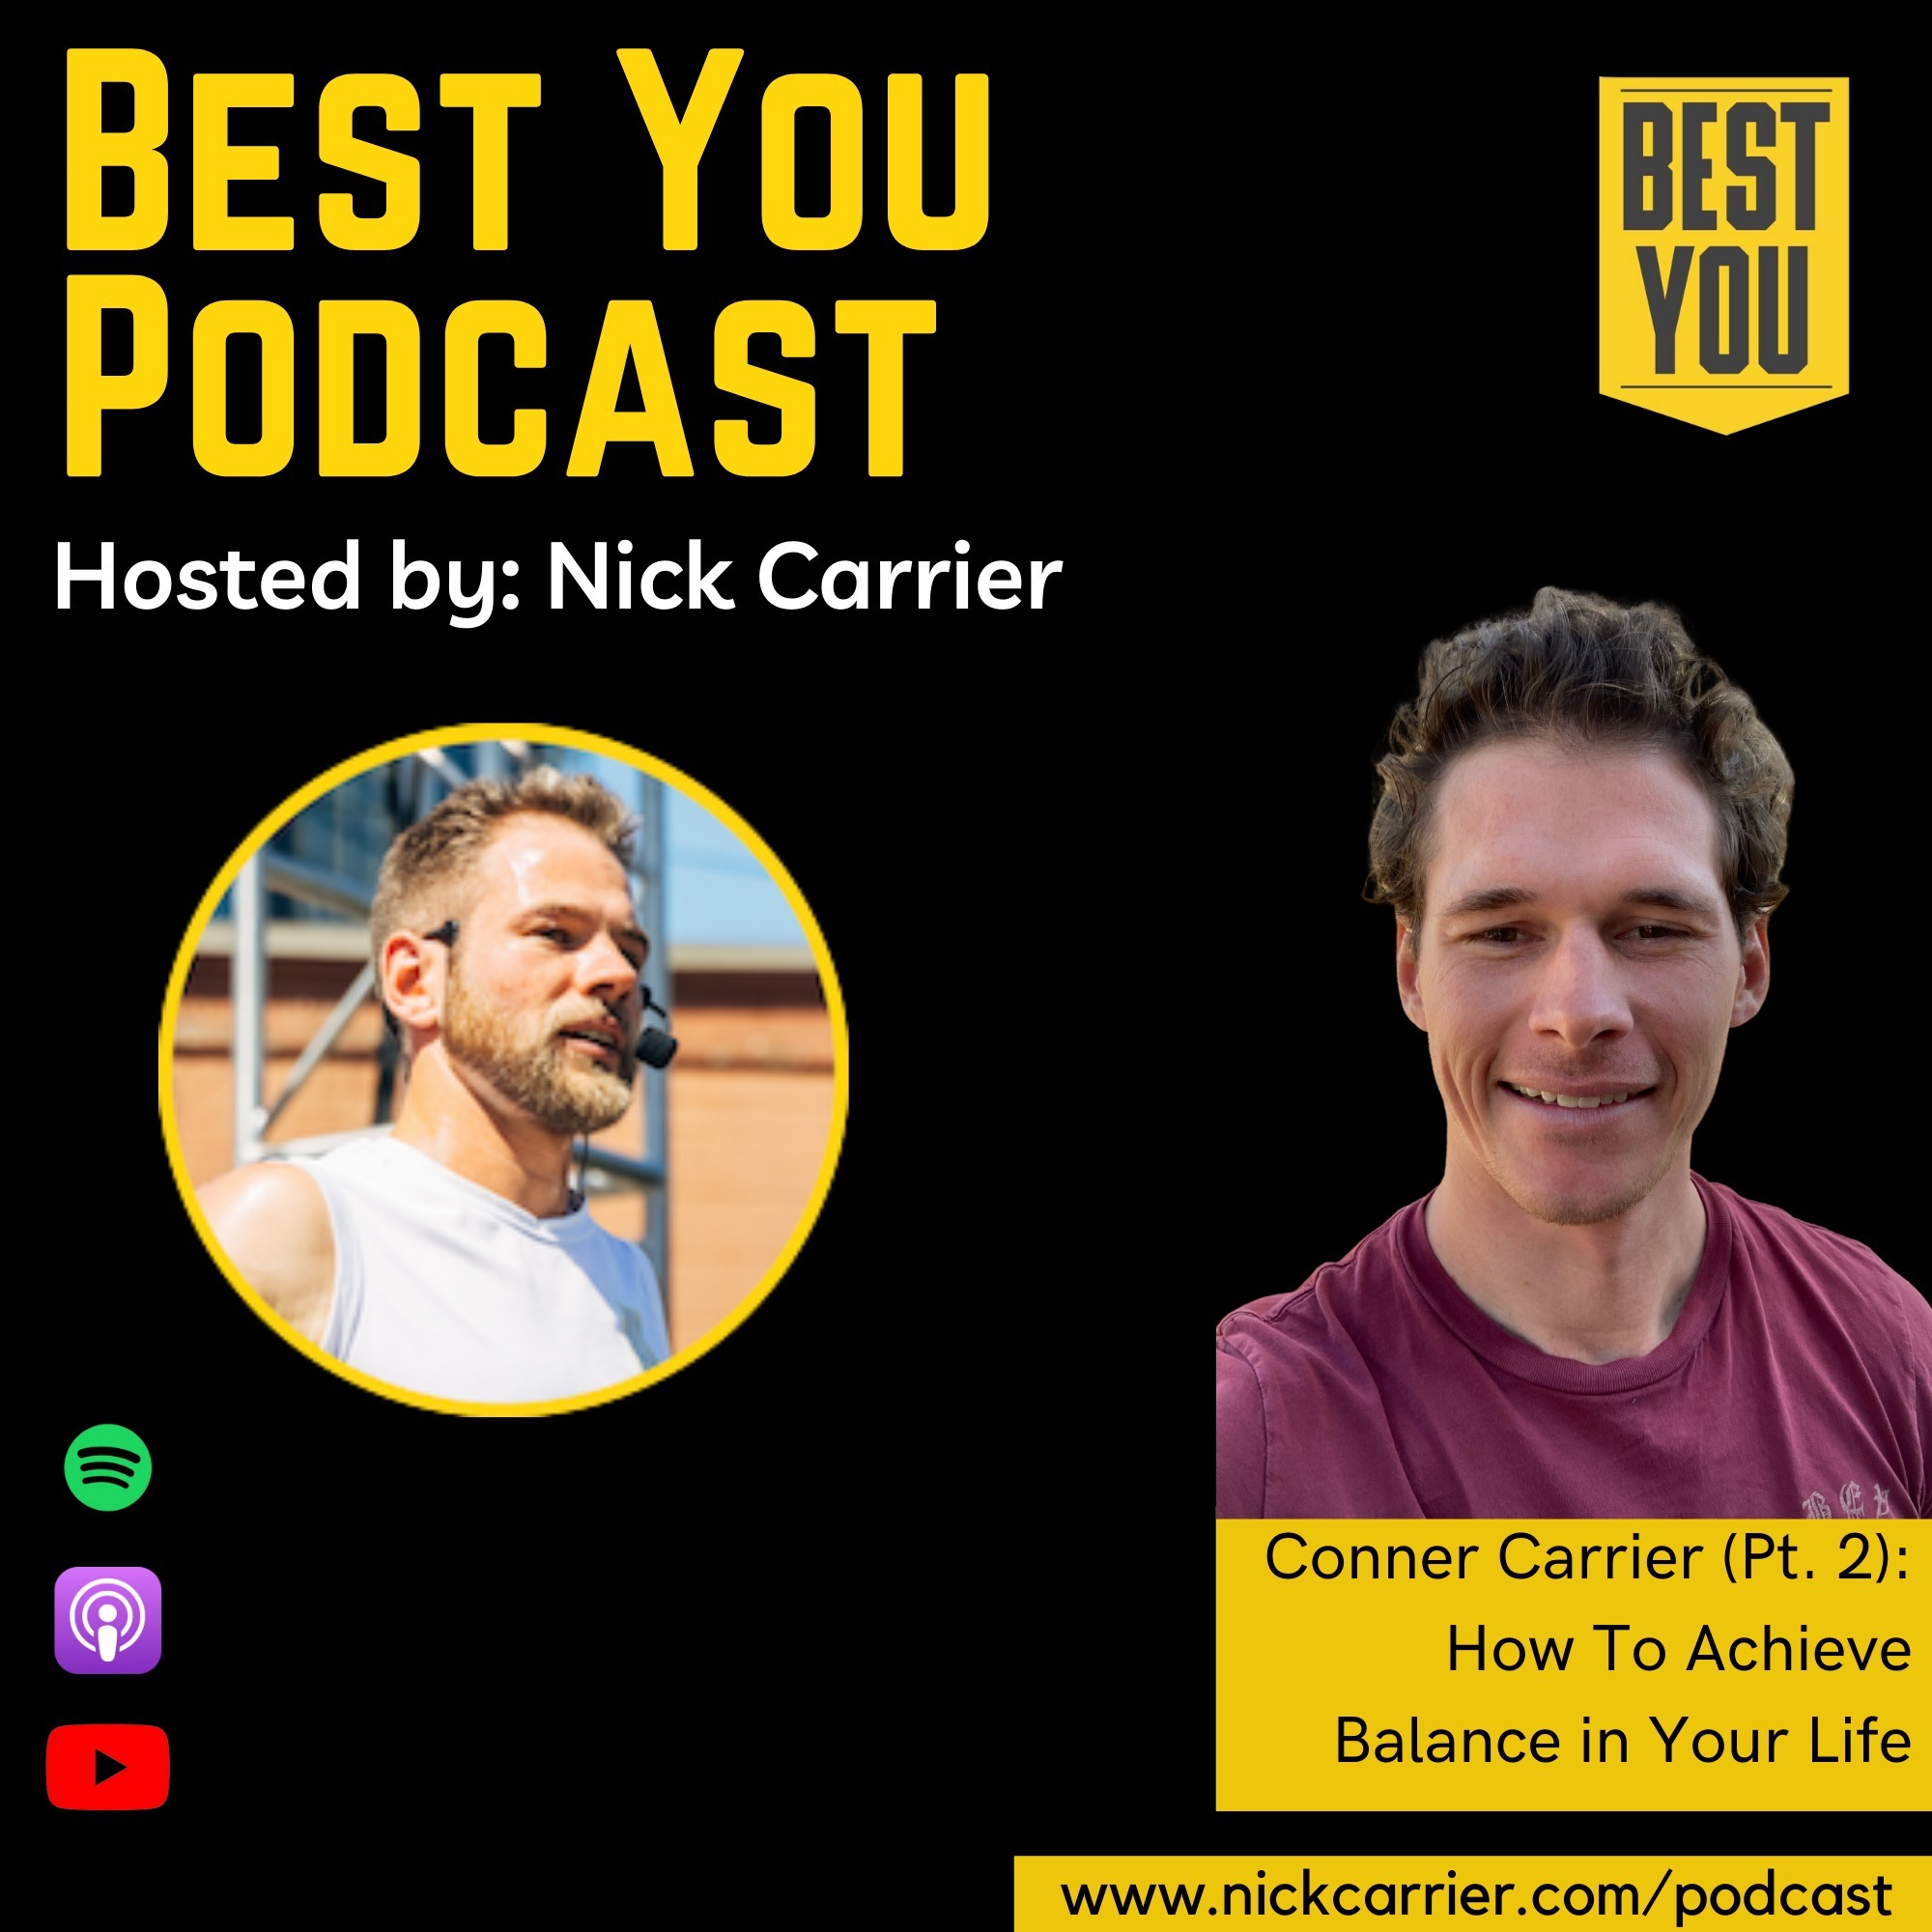 Conner Carrier - How To Achieve Balance in Your Life (Pt. 2)